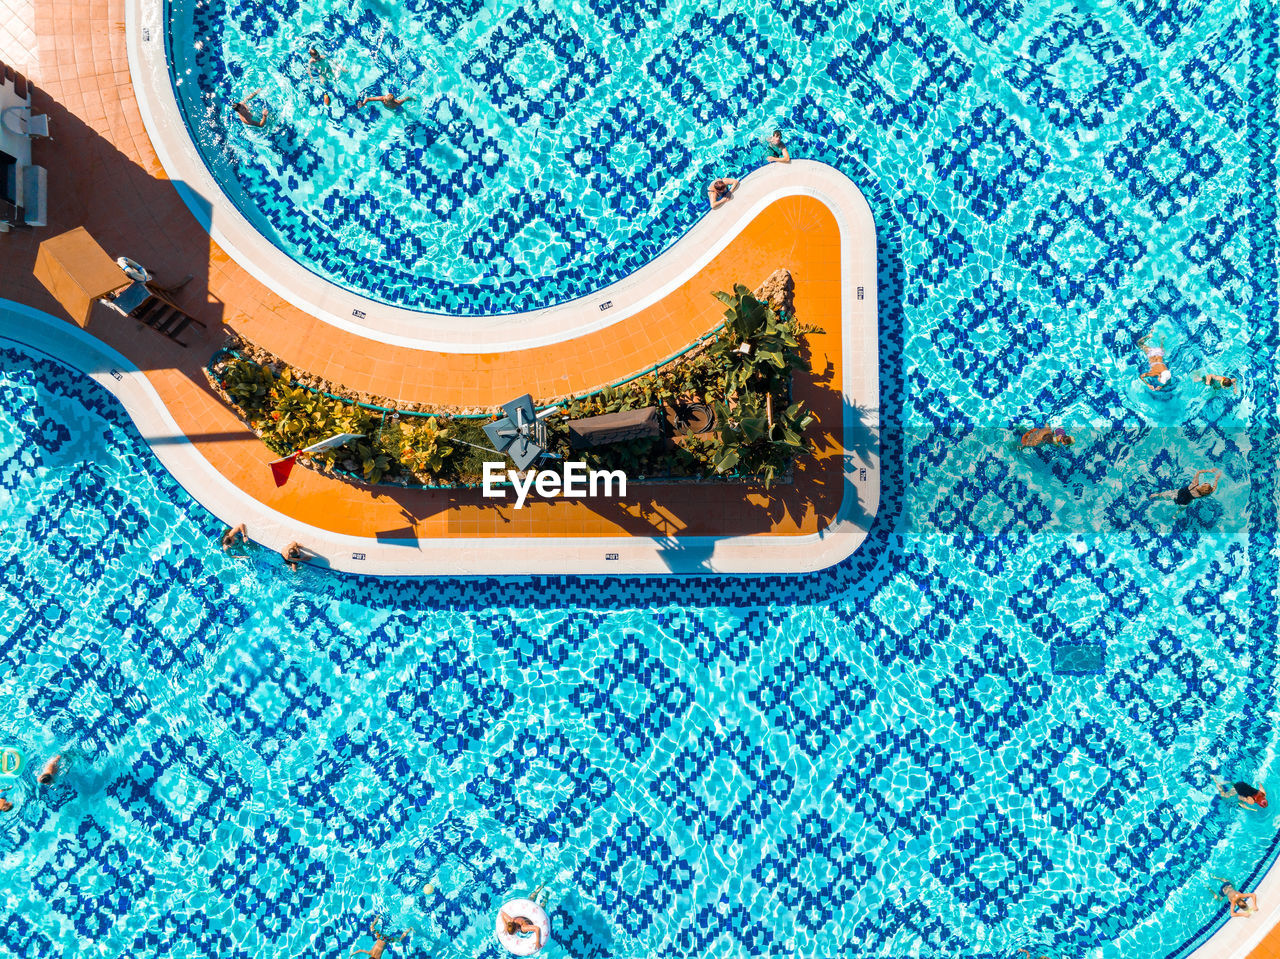 Aerial view of the outdoor swimming pool in a luxury hotel.